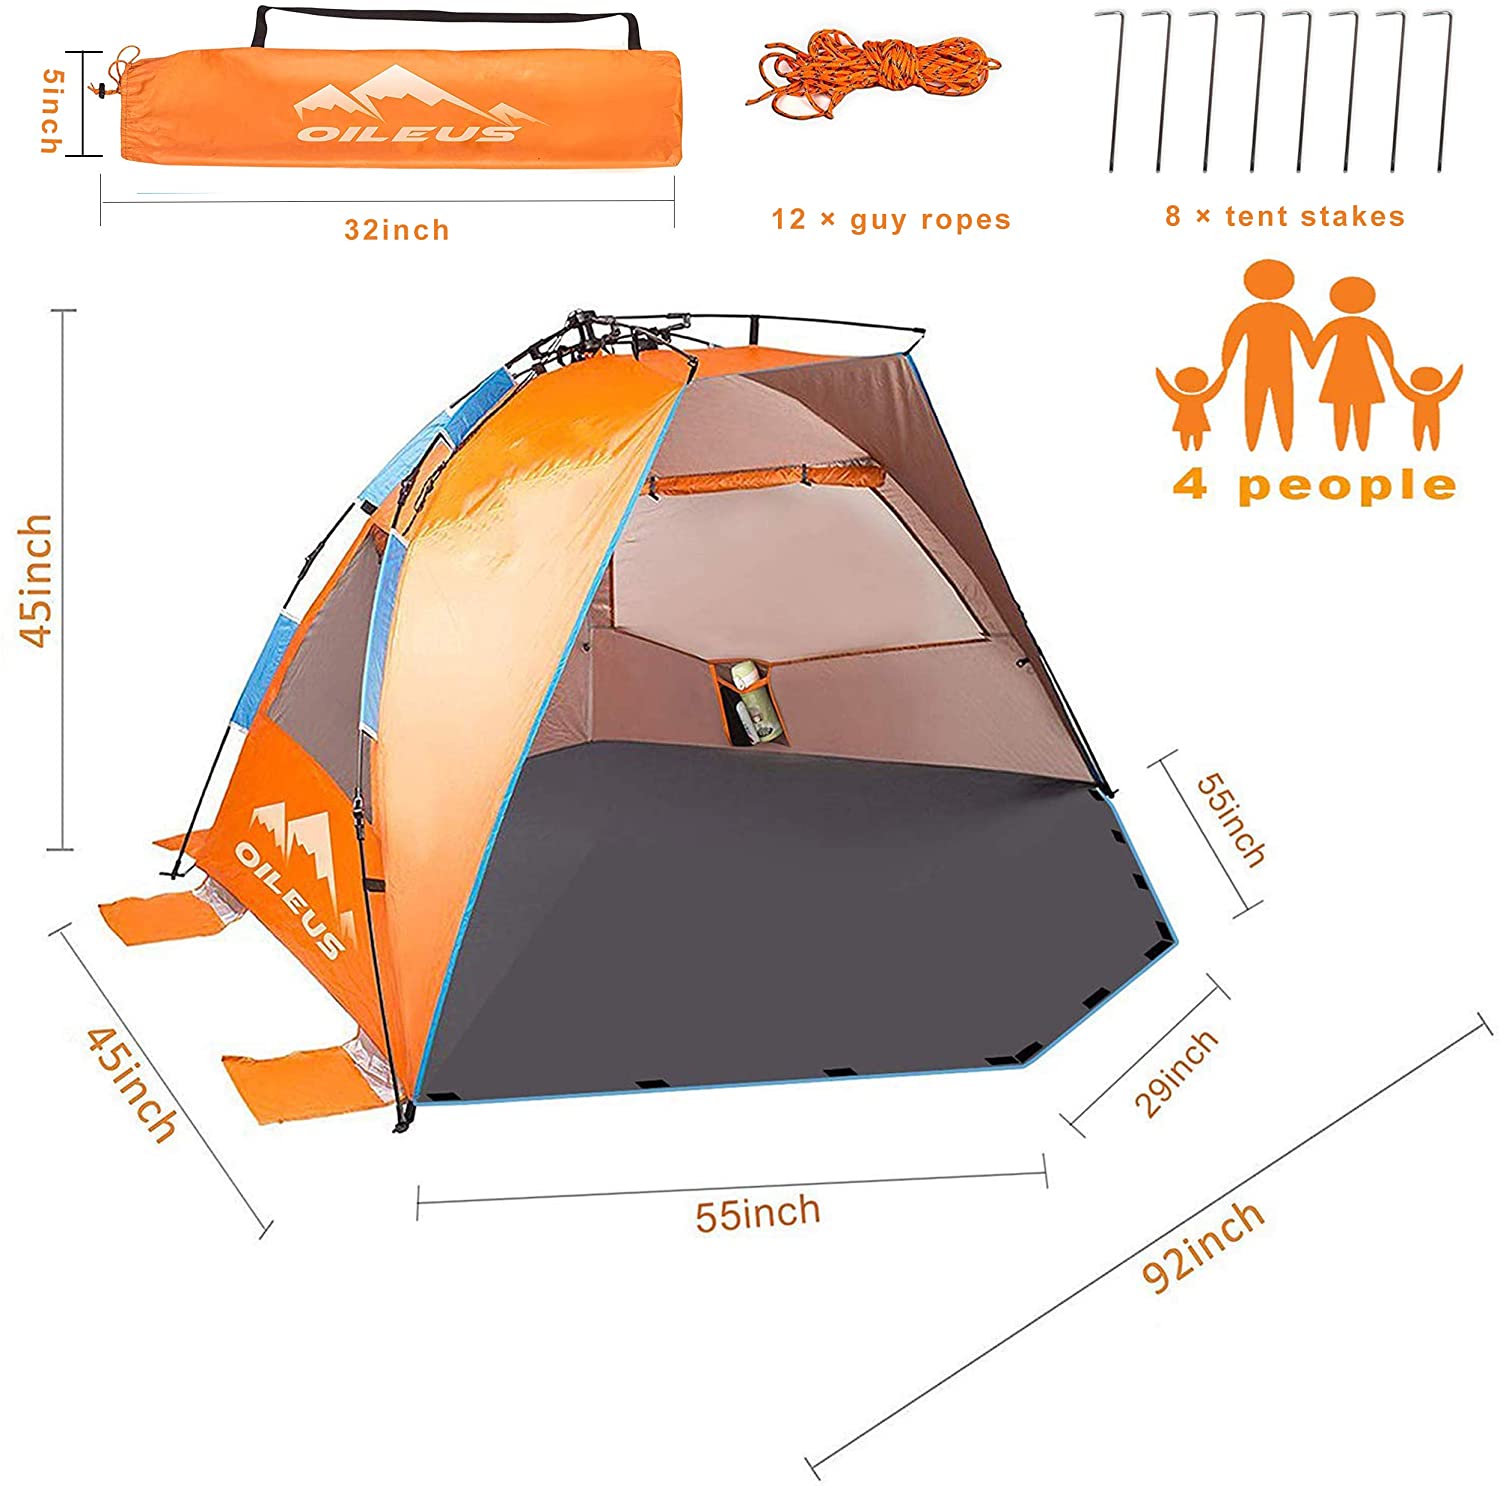 Oileus X Large 4 Person Beach Tent Sun Shelter Portable Sun Shade Instant Tent for Beach with Carrying Bag Stakes 6 Sand Pockets Anti UV for Fishing Hiking Camping Waterproof Windproof Orange - image 5 of 7